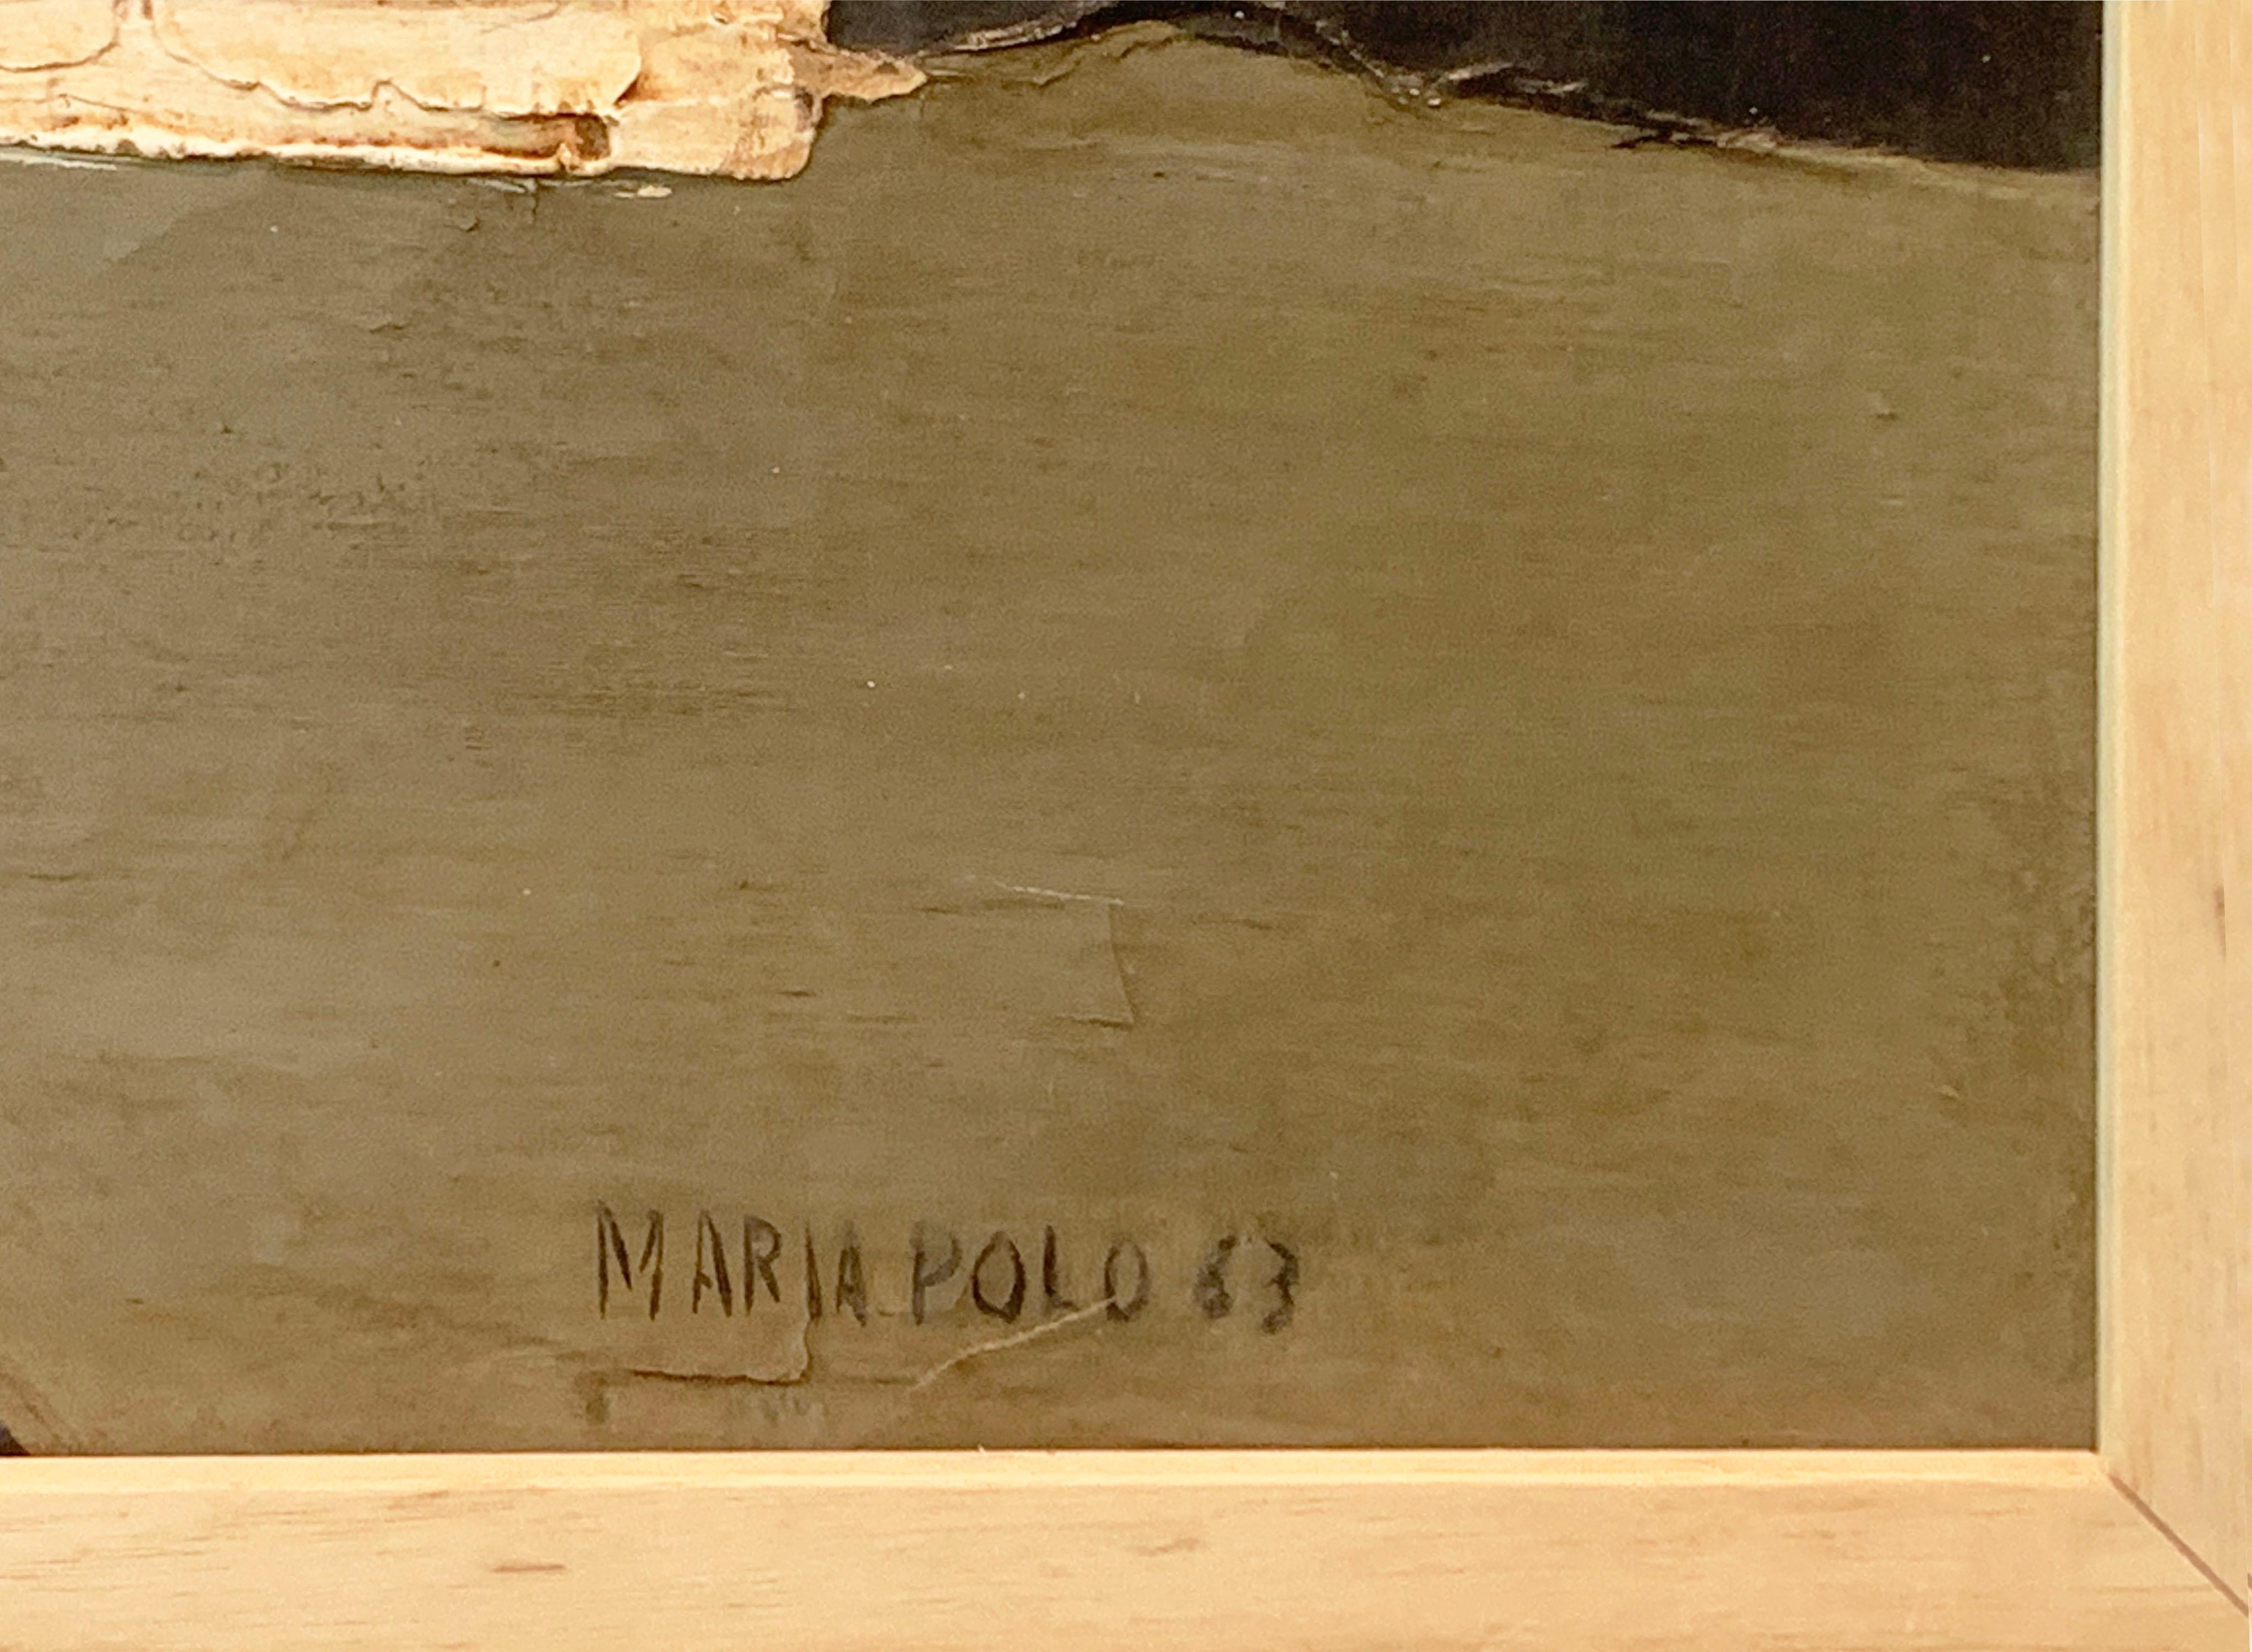 Abstract oil on canvas by Maria Polo (Brazil, 1937-1983)
Original frame.
Signed and dated '63 on front.